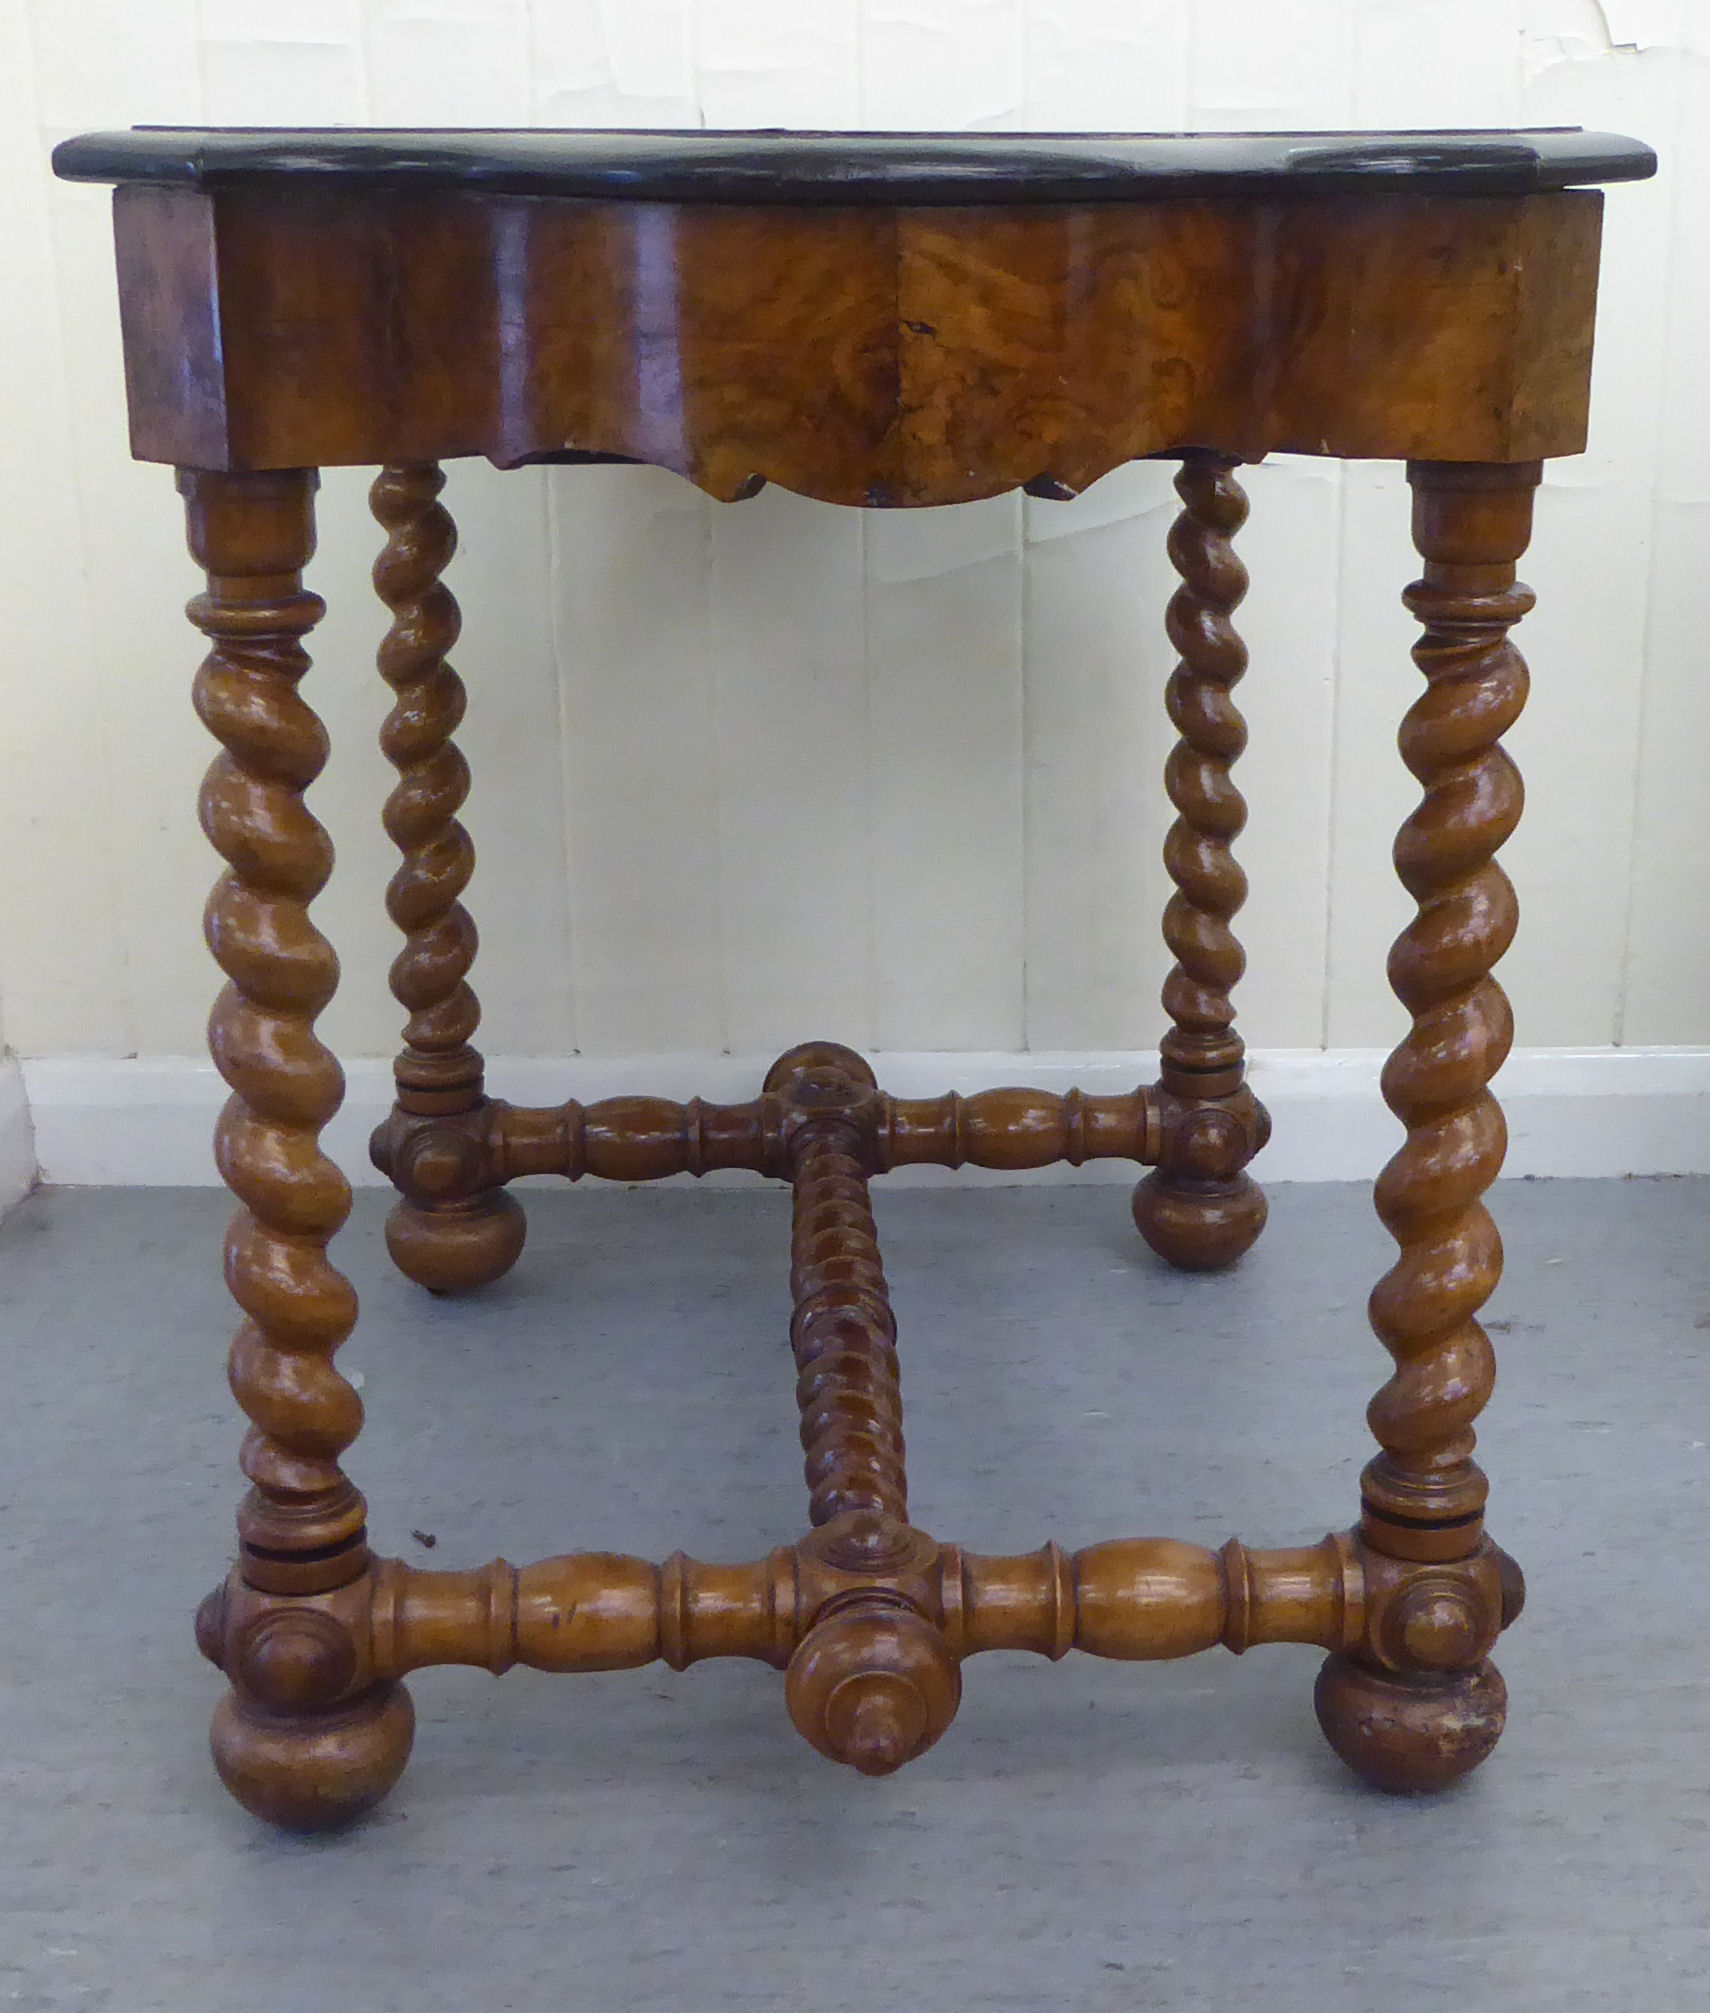 A late 19thC Continental figured walnut and floral marquetry games table with a serpentine - Image 4 of 4